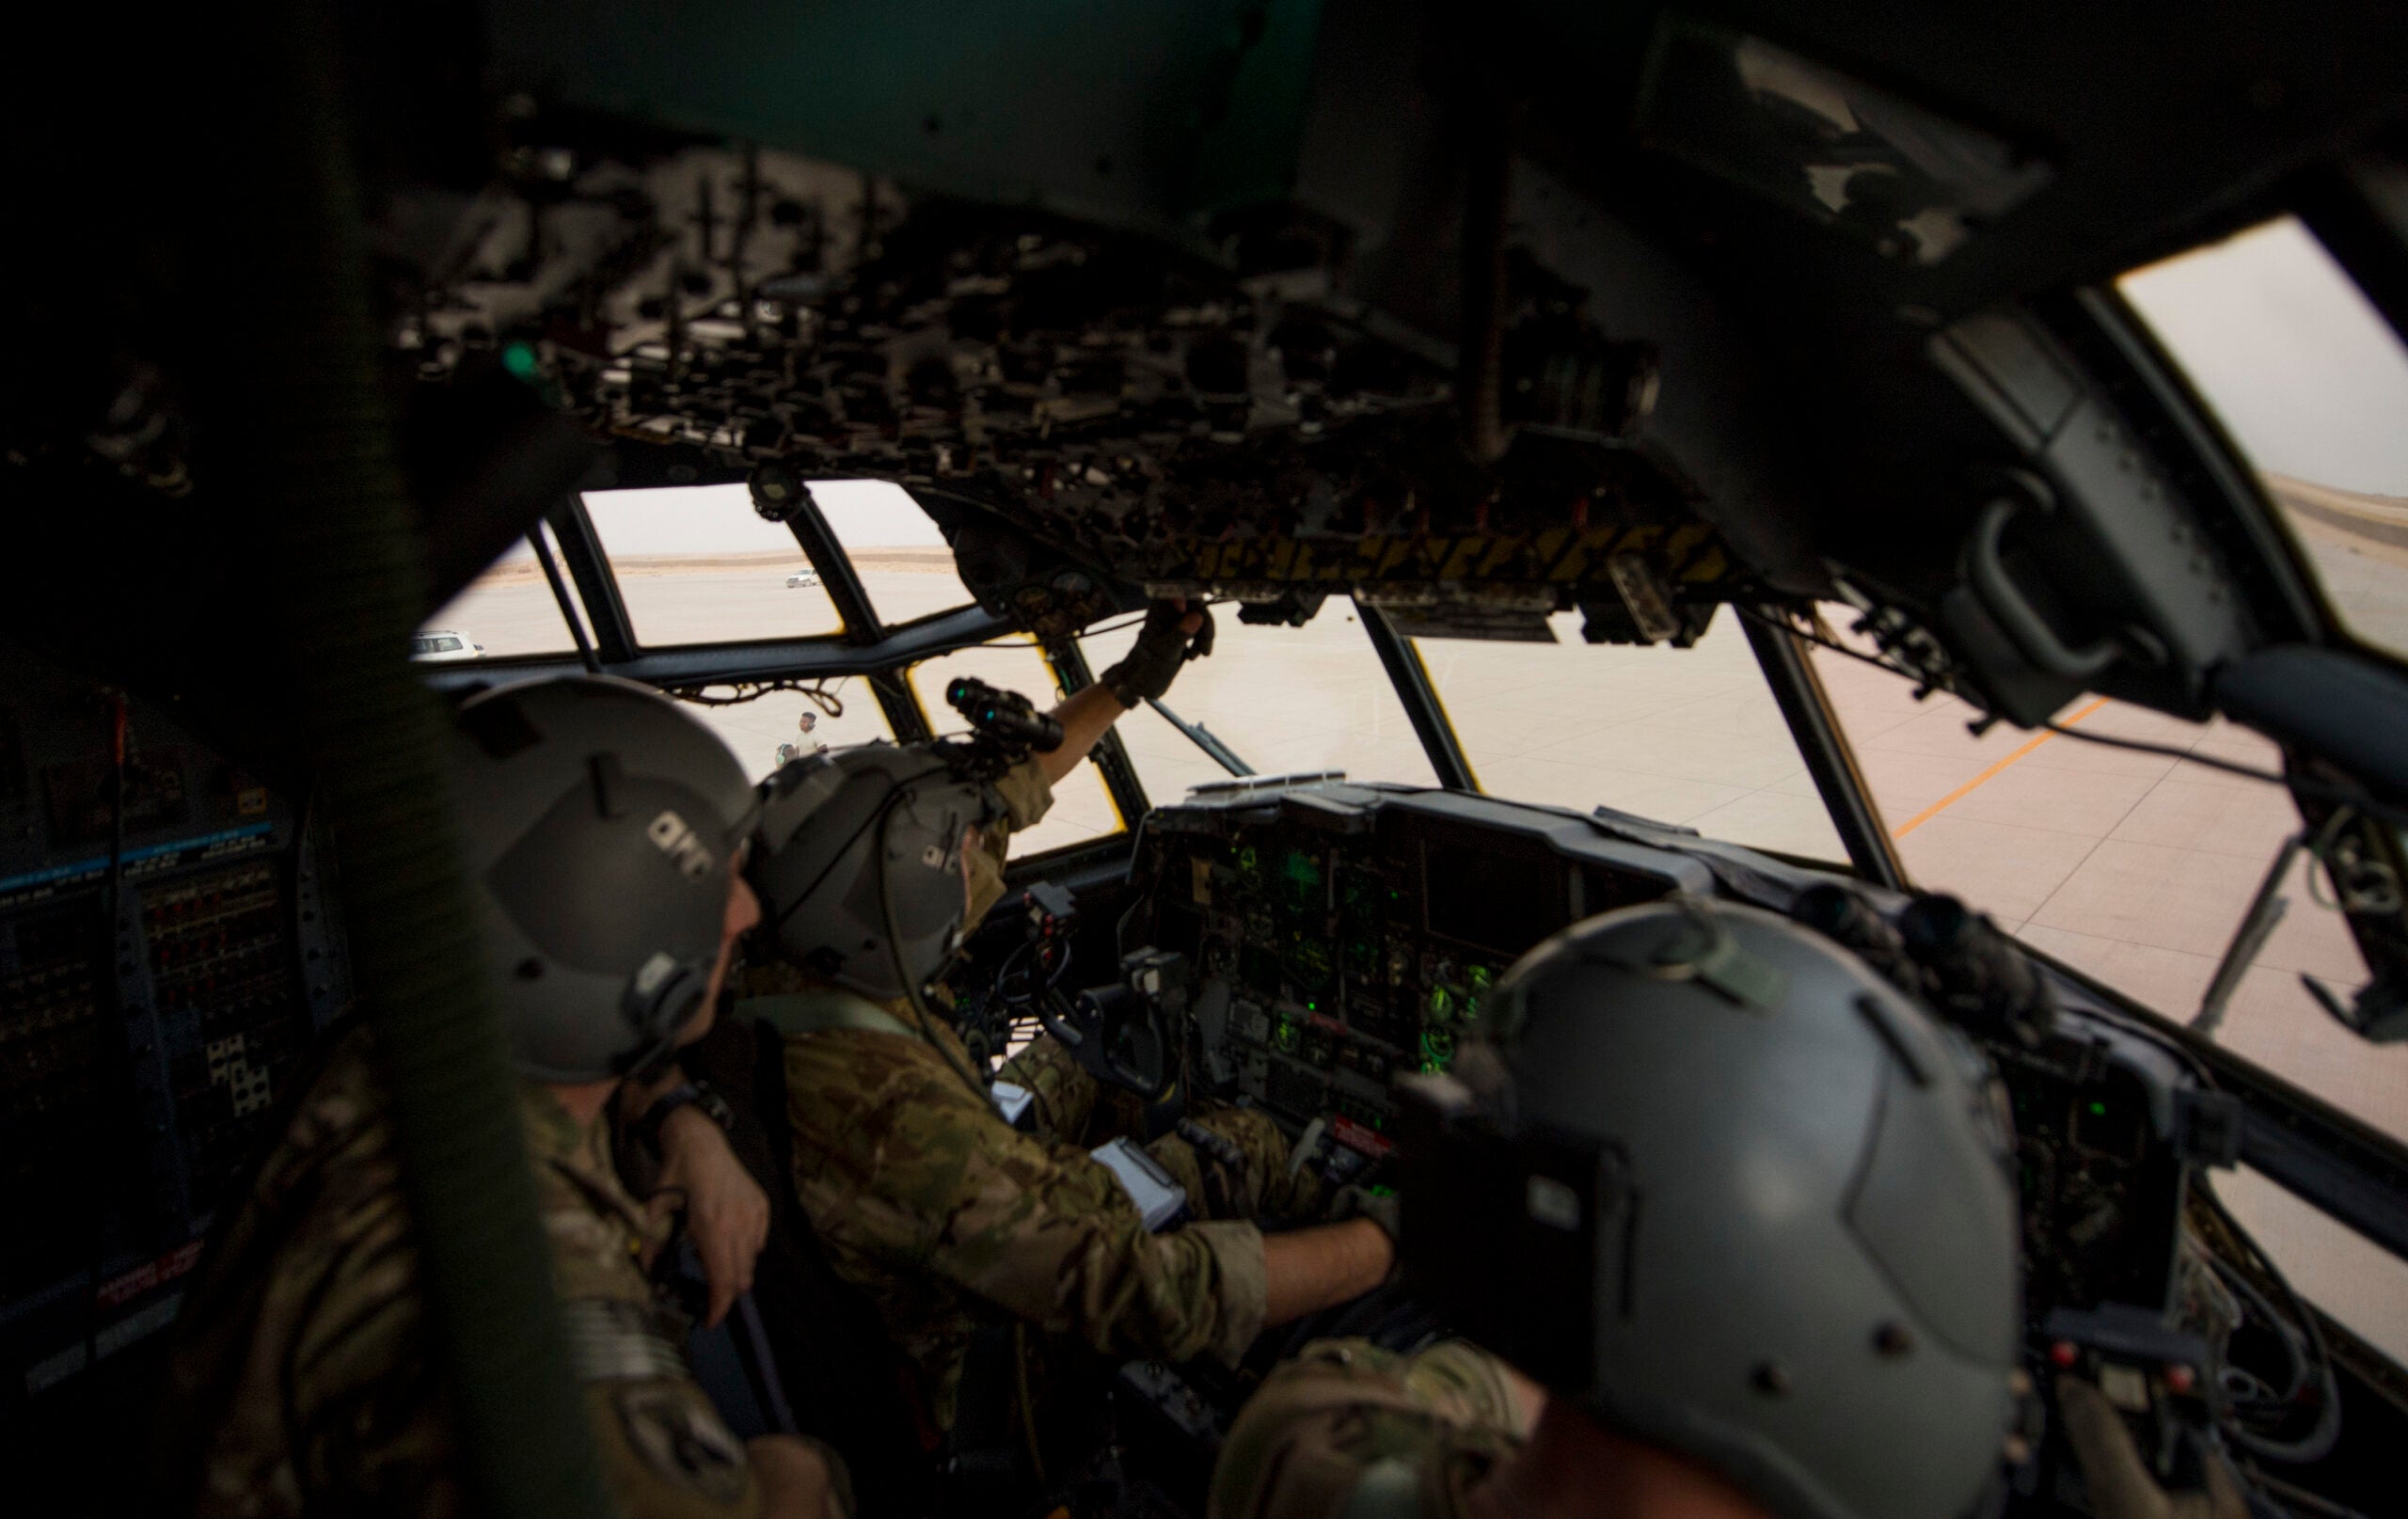 U.S. Air Force aircrew members assigned to the the 16th Expeditionary Special Operations Squadron perform pre flight checks onboard a AC-130W Stinger II before a mission in support of Operation Inherent Resolve, Southwest Asia, July 23, 2018. The AC-130W include a mission management console, communications suite, two electro-optical/infrared sensors, fire control equipment, precision guided munitions delivery capability; and one side-firing, trainable 30mm gun with tracer-less ammunition and associated munitions storage system. The mission management system will fuse sensor, communication, environment, order of battle and threat information into a common operating picture. The AC-130W Stinger II Precision Strike Package modification provides ground forces an expeditionary, persistent direct fires platform that delivers precision low-yield munitions, ideally suited for close air support and urban operations.(U.S. Air Force photo by Staff Sgt. Keith James)